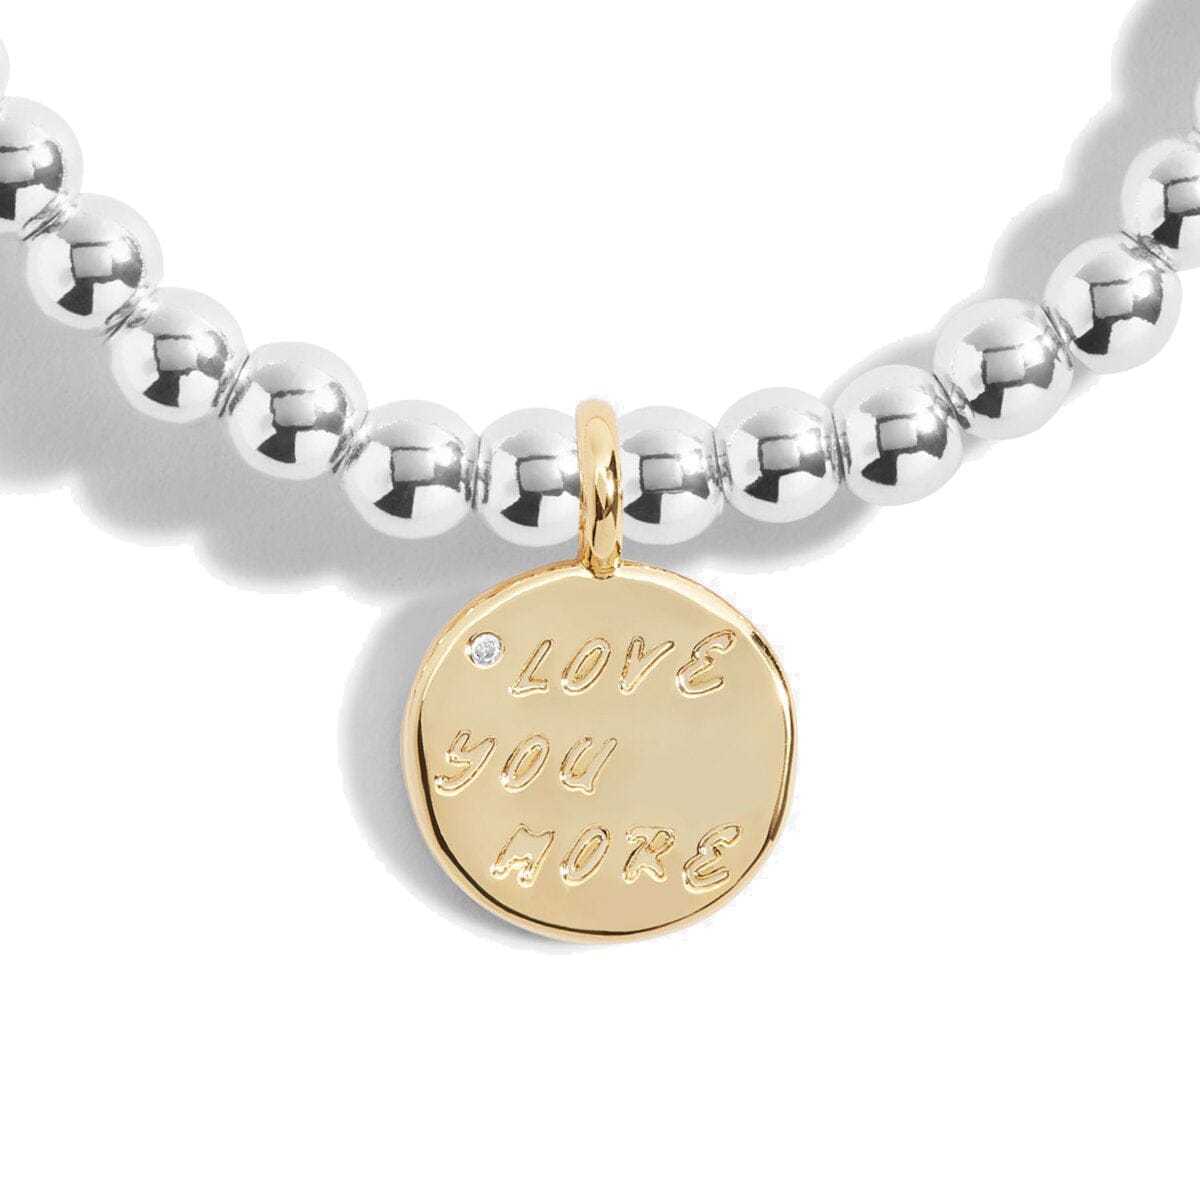 Joma Jewellery Bracelet Joma Jewellery Bracelet - A Little Love You More